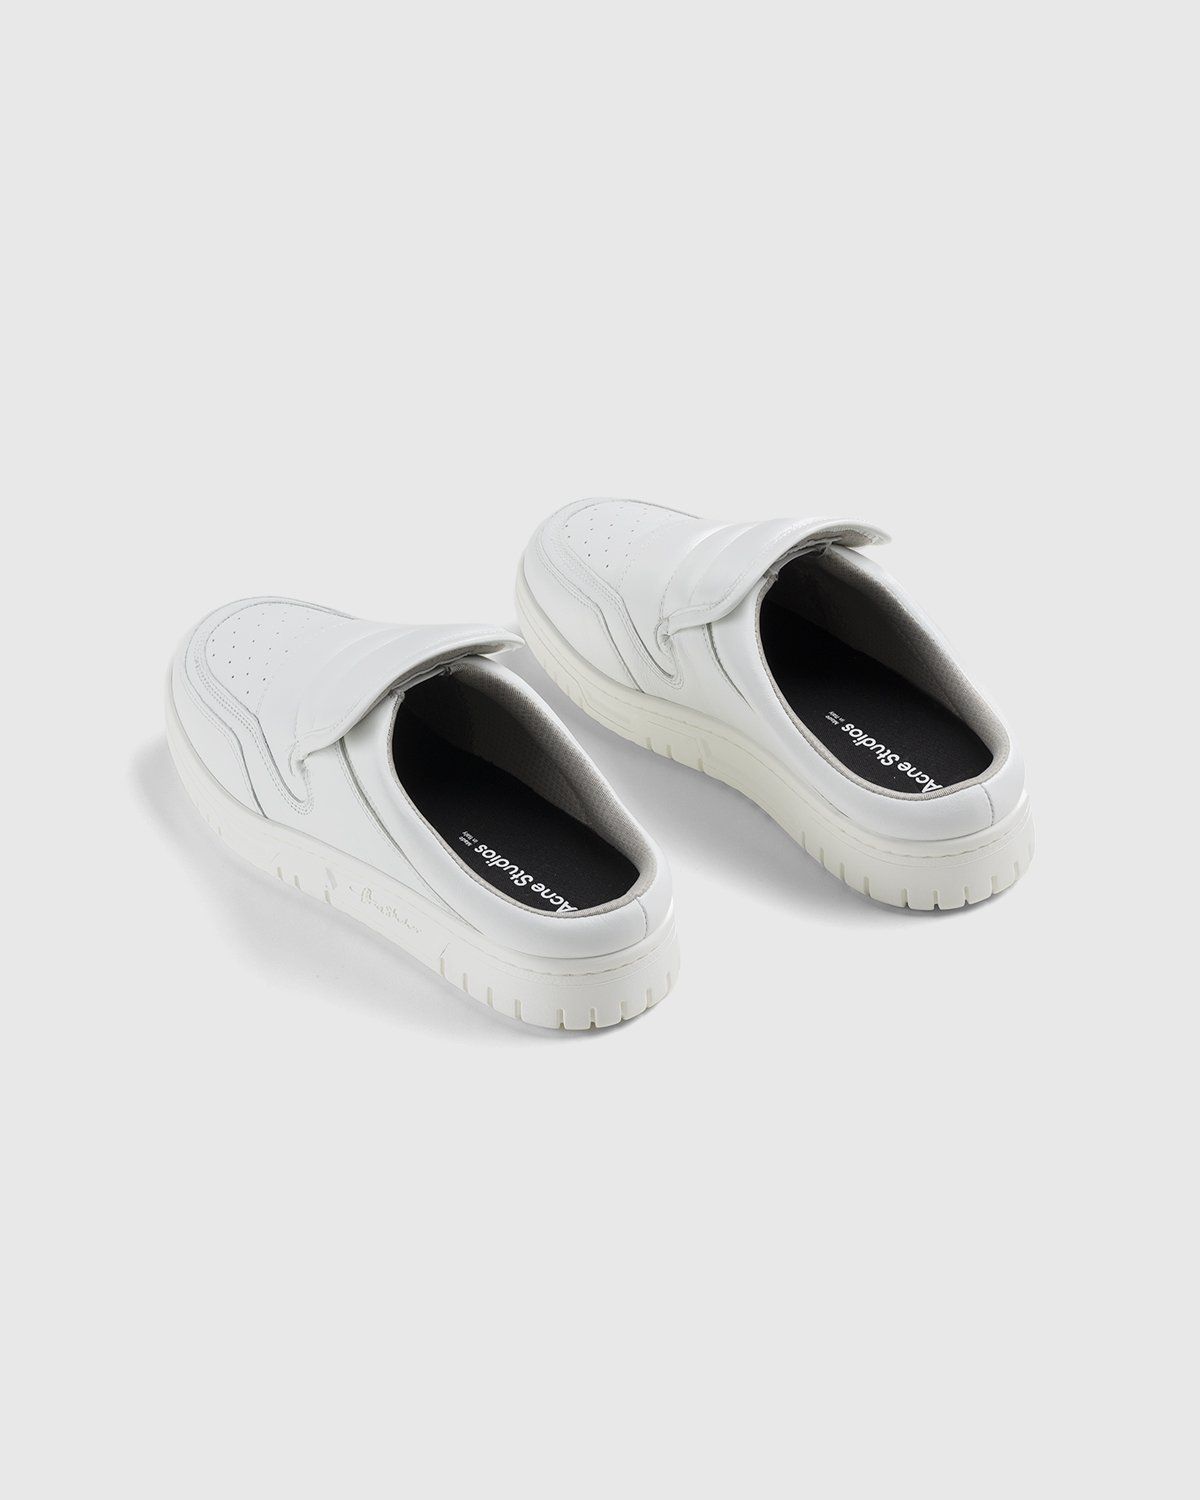 Acne Studios – Cow Leather Mule White - Image 4